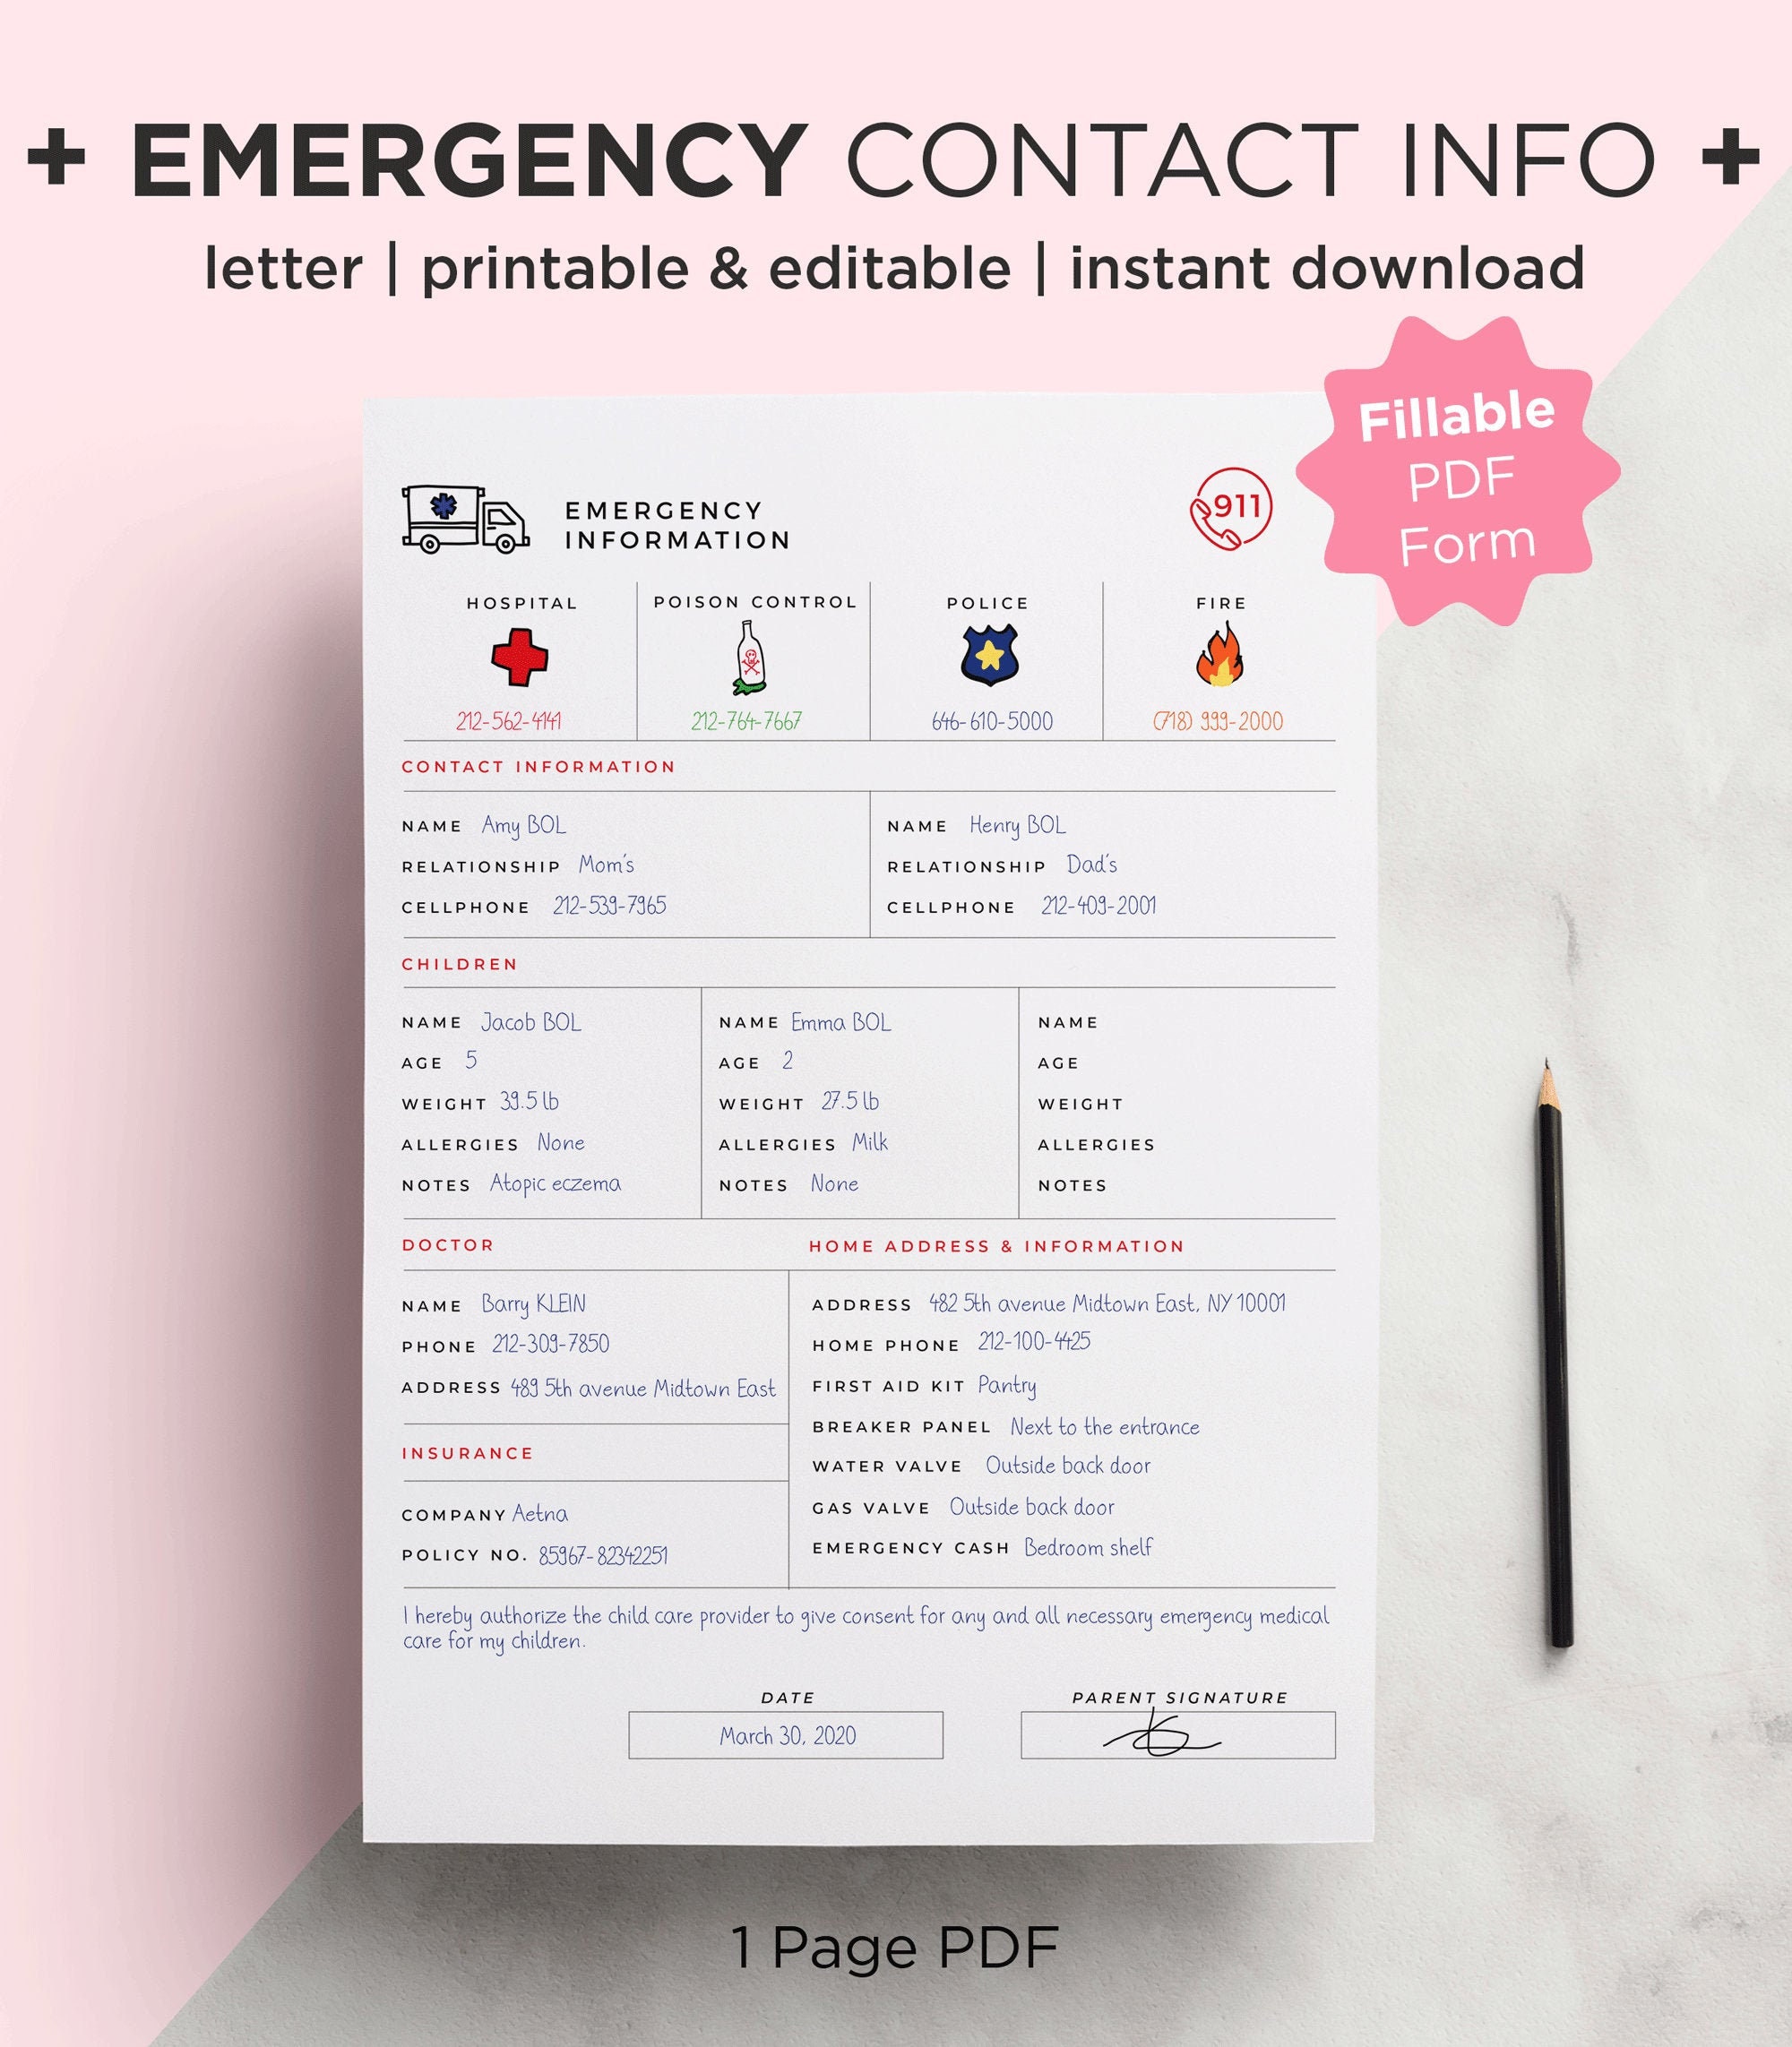 free-employee-emergency-contact-form-pdf-word-eforms-free-printable-and-editable-emergency